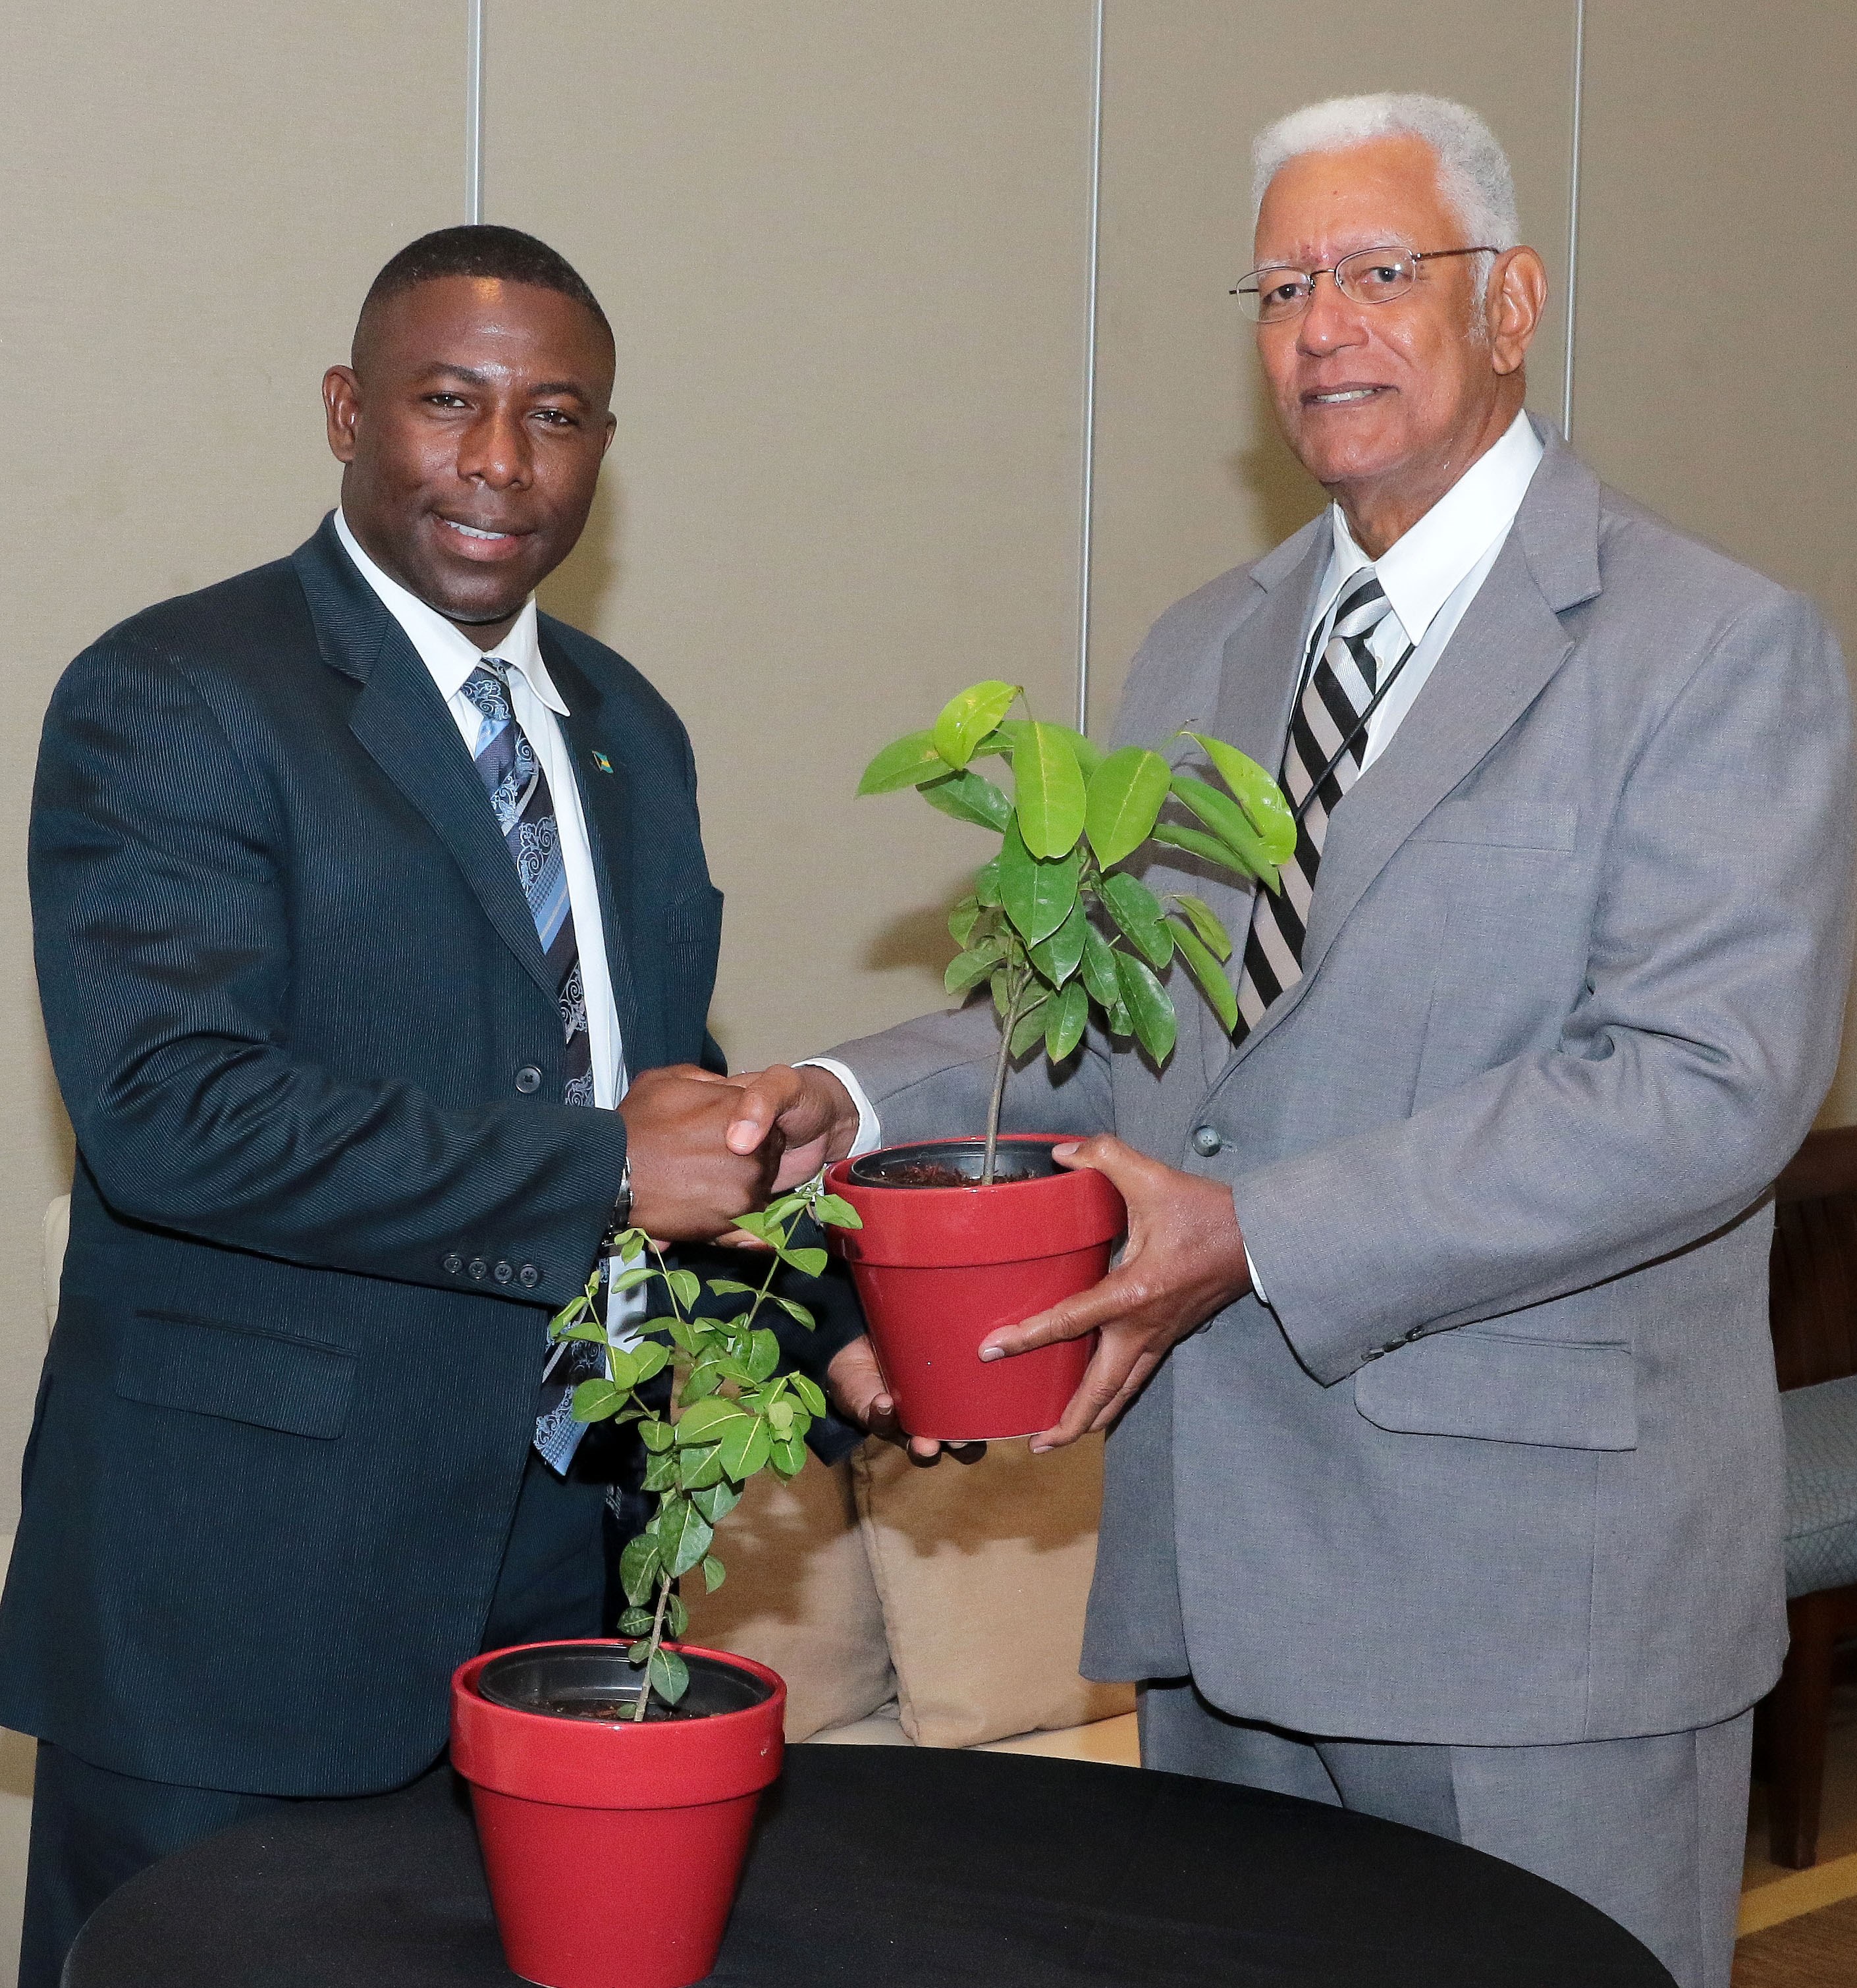 Agriculture Minister Hon. Noel Holder hands over the donated plants to the Hon. Renward Wells, Minister of Agriculture and Marine Resources, Bahamas